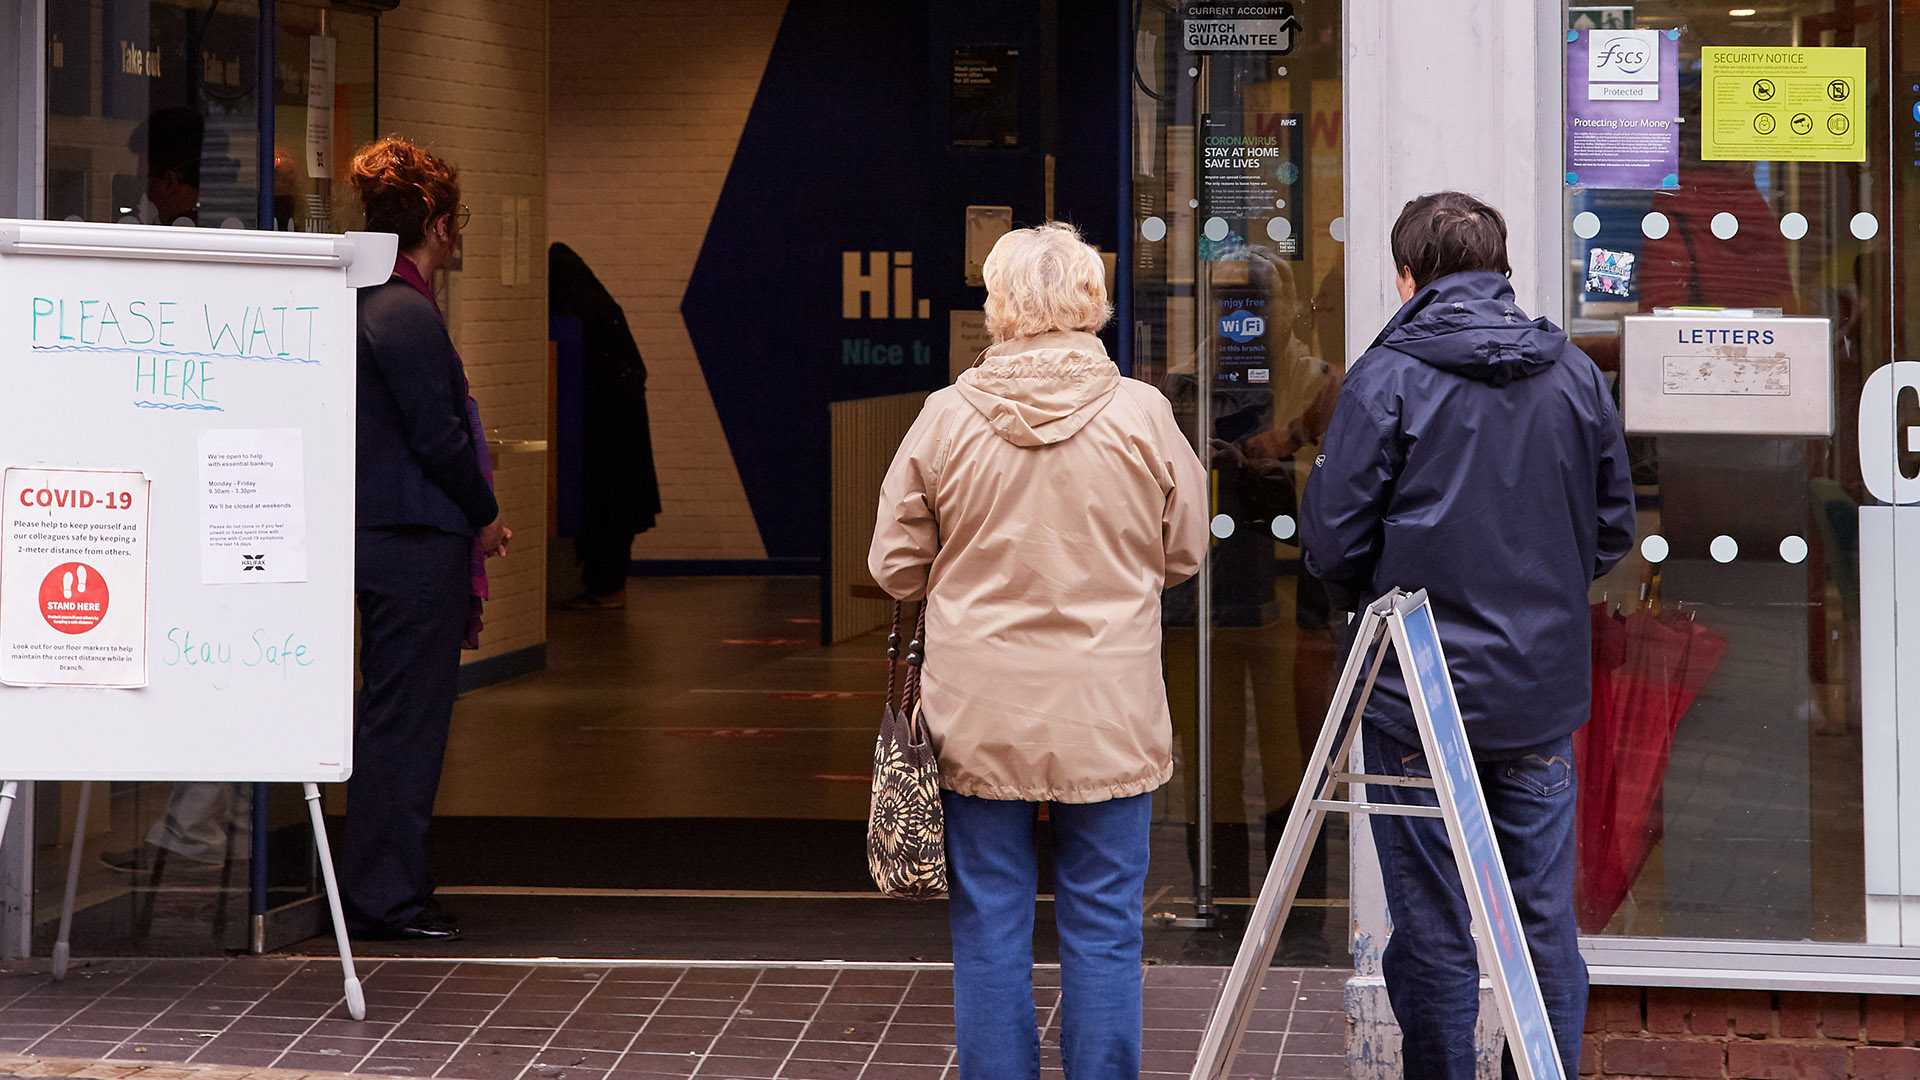 Customers queuing outside a Halifax bank branch due to Covid restrictions